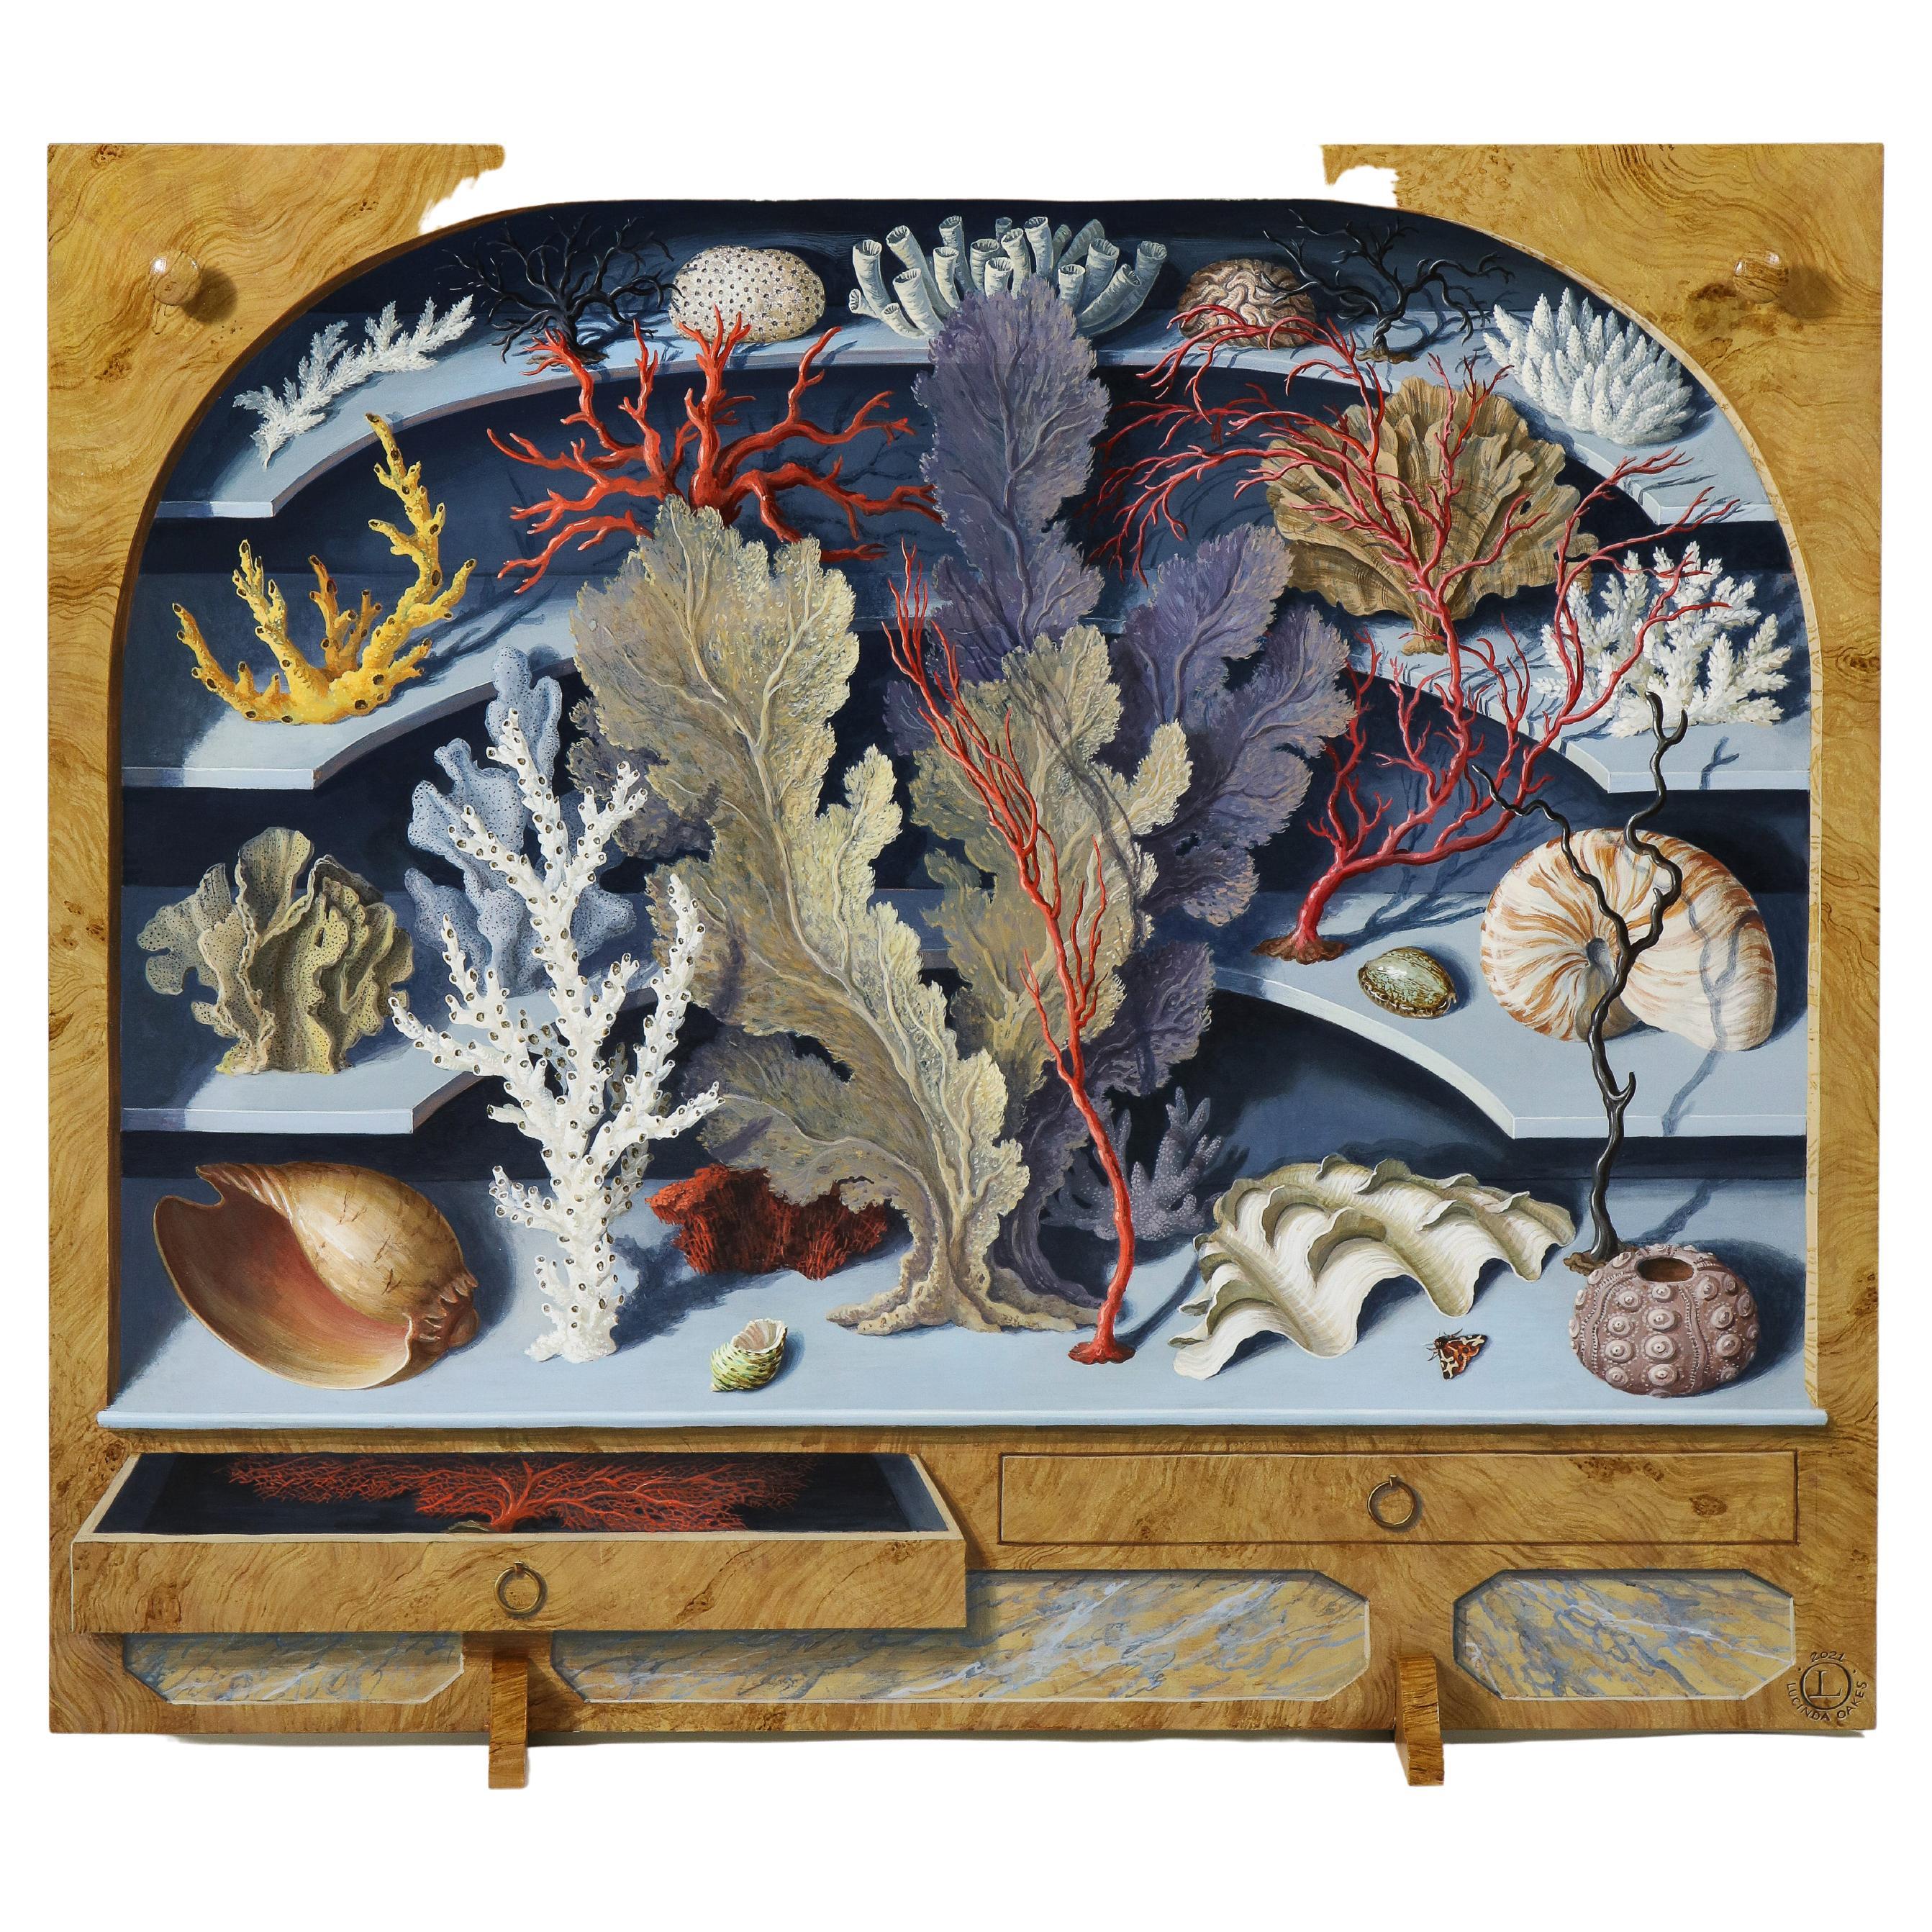 Oil on board
Exquisitely painted with trompe l'oeil decoration of a wunderkammer filled with shells and coral specimens; with knobs and on removable feet.
Designed to be placed in front of a chimney during the summer months when not in use, a